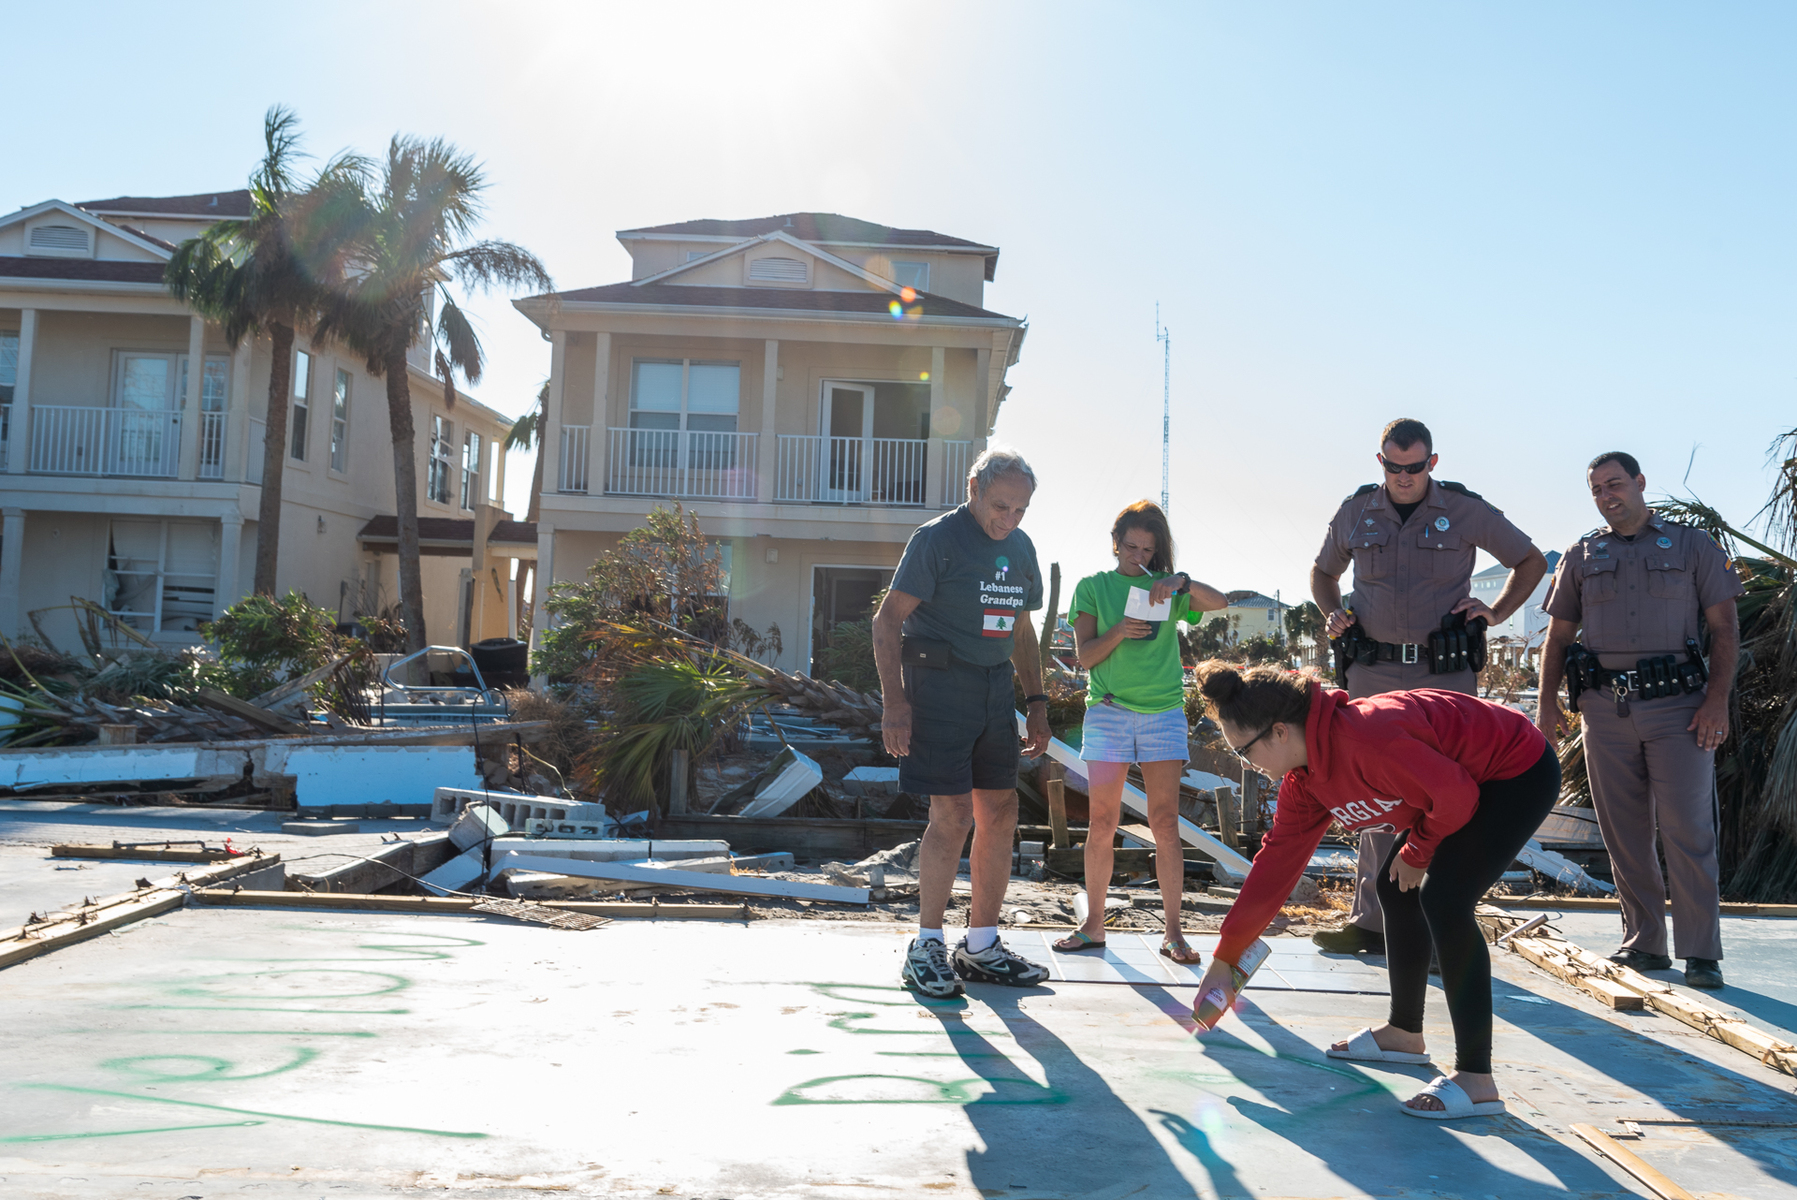 October 18, 2018 - Mexico Beach, FL - George Mamary, daugther Adlette Eubanks and granddaughter Makalah of Atlanta, GA  survey what is left of their vacation home in Mexico Beach, Florida after Hurricane Michael as passed through the area on October 15, 2018 in Mexico Beach, Florida.  The hurricane hit the Florida Panhandle as a category 5 storm causing massive damage and claimed the lives of more then a dozen people.